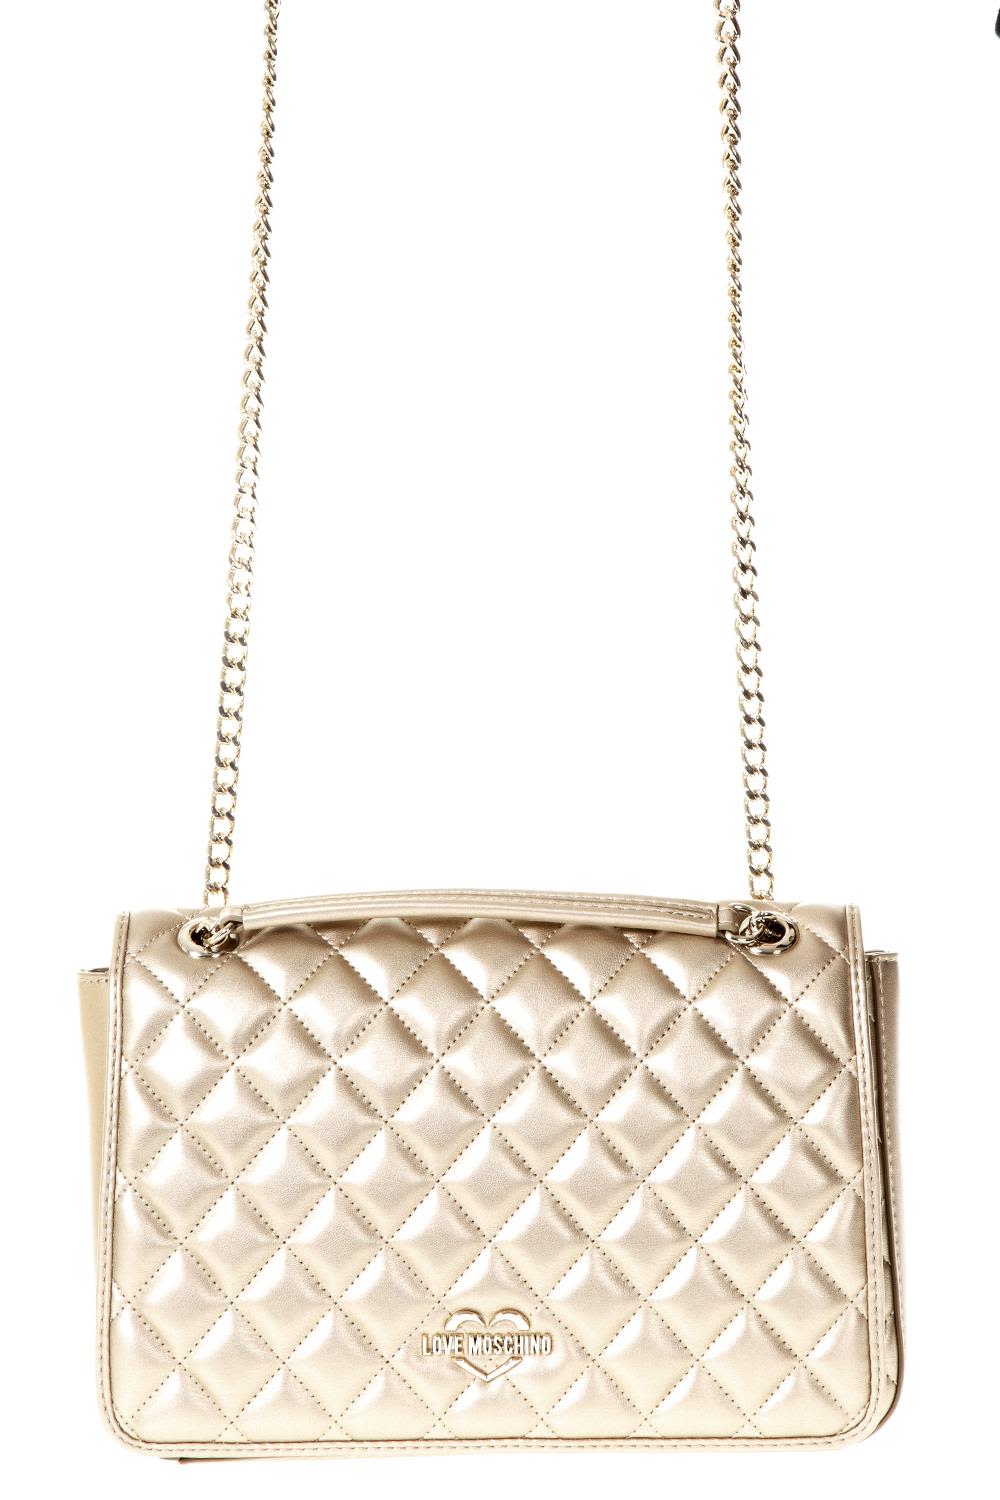 LOVE MOSCHINO GOLD QUILTED FAUX LEATHER BAG,10606598